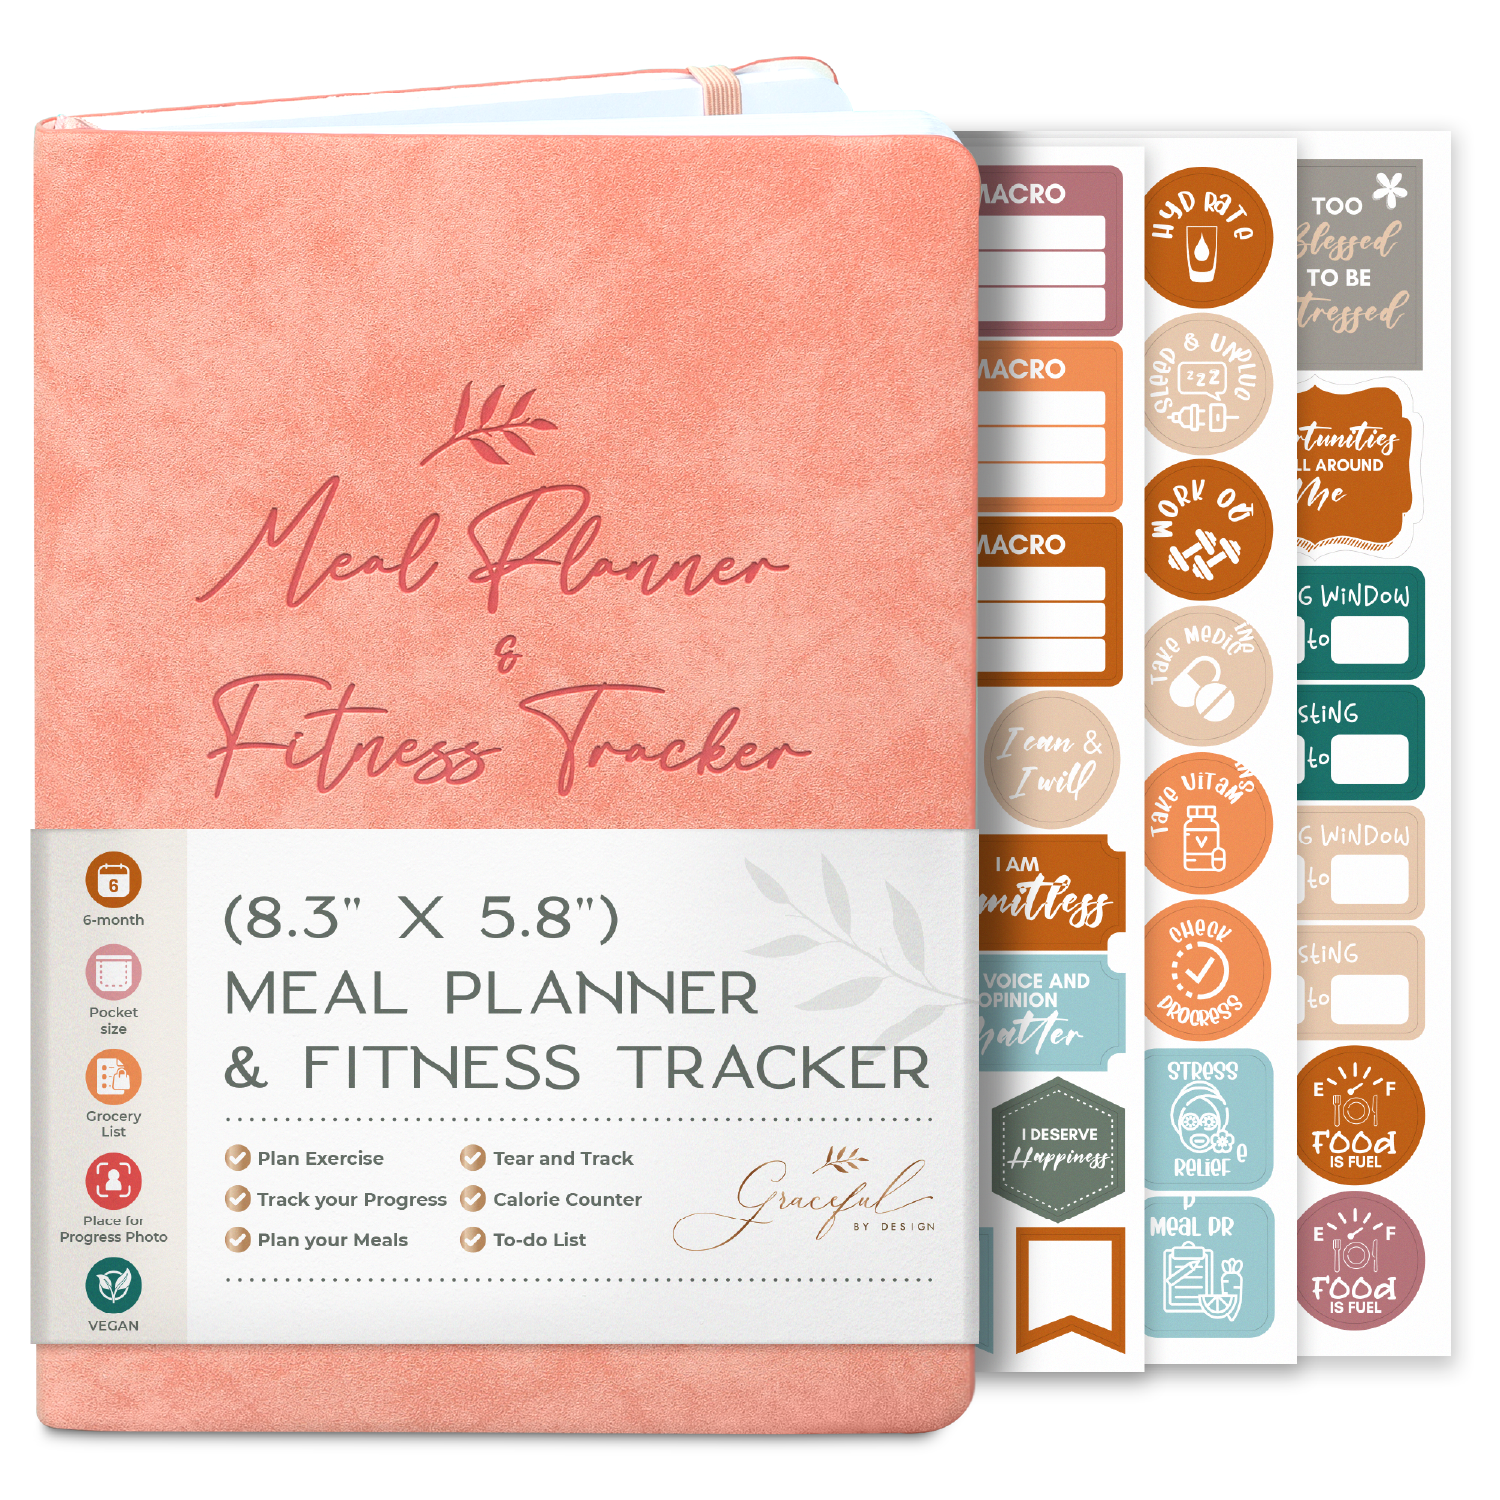 Weekly Meal Planner and Fitness Tracker - Log Workouts, Track Food & Macros